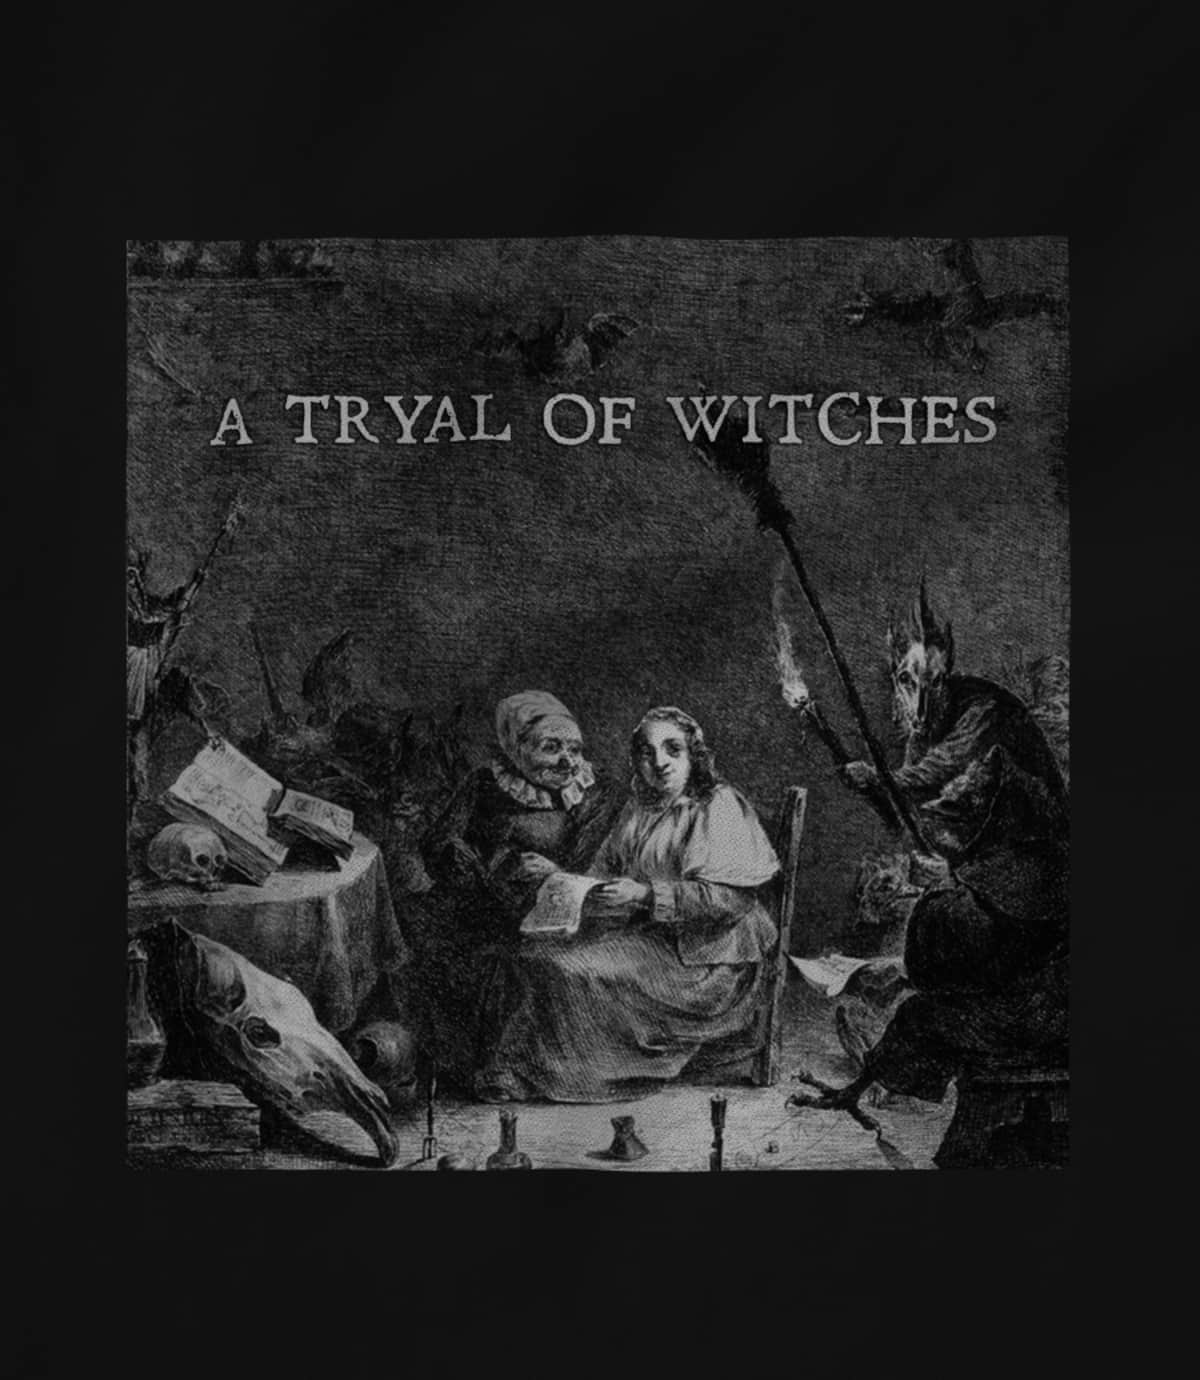 A Tryal of Witches